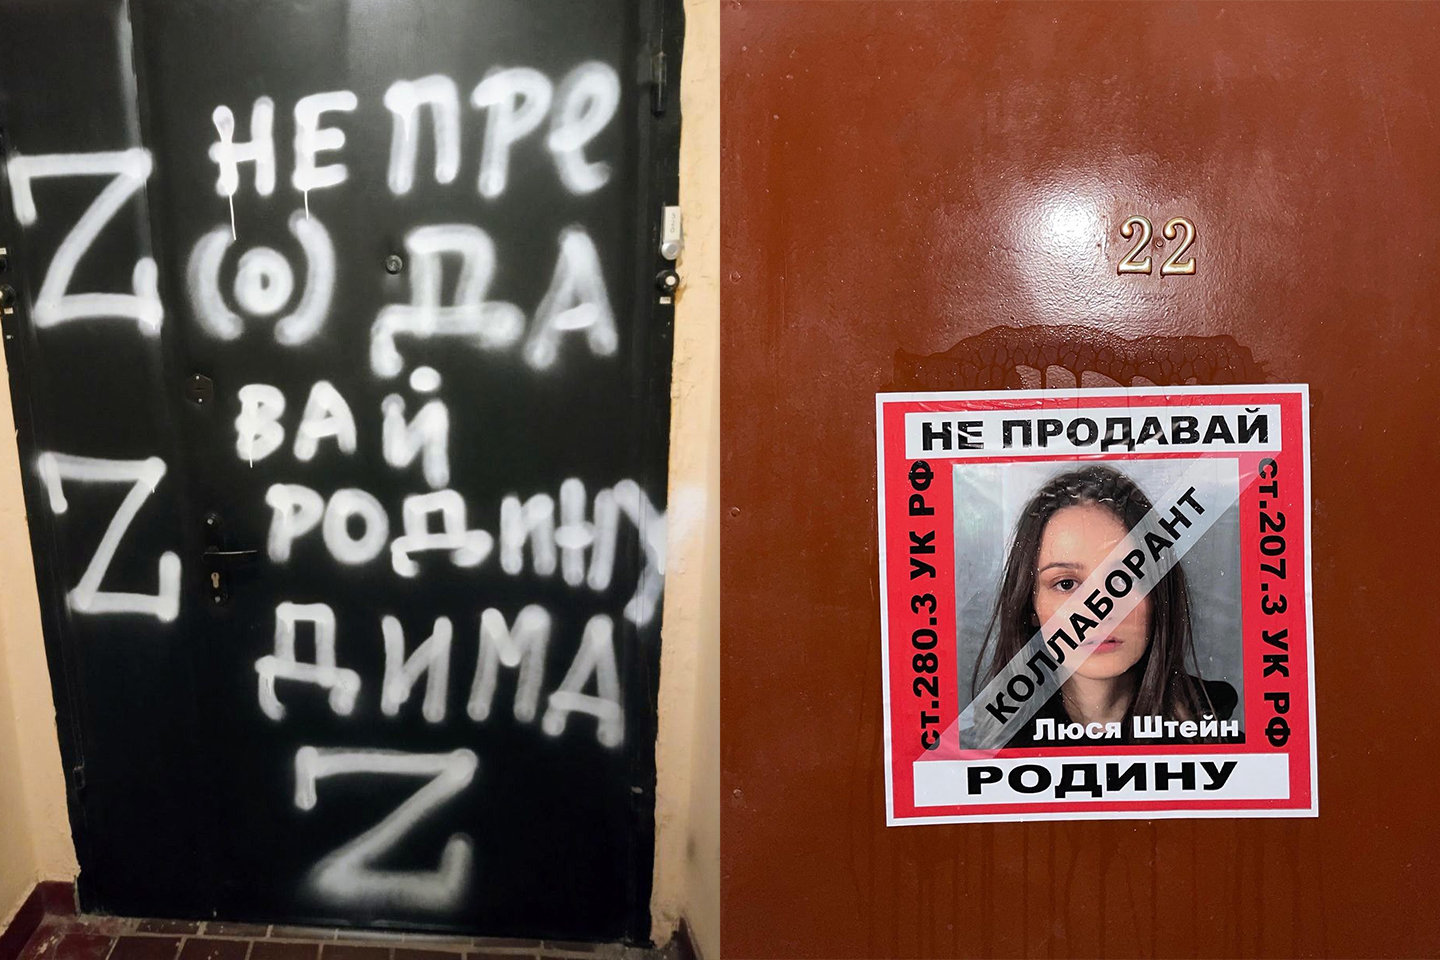 Doors of the “Protest MSU” activist Dmitry Ivanov and Lucy Stein / Photo: SOTA and Stein's Instagram page